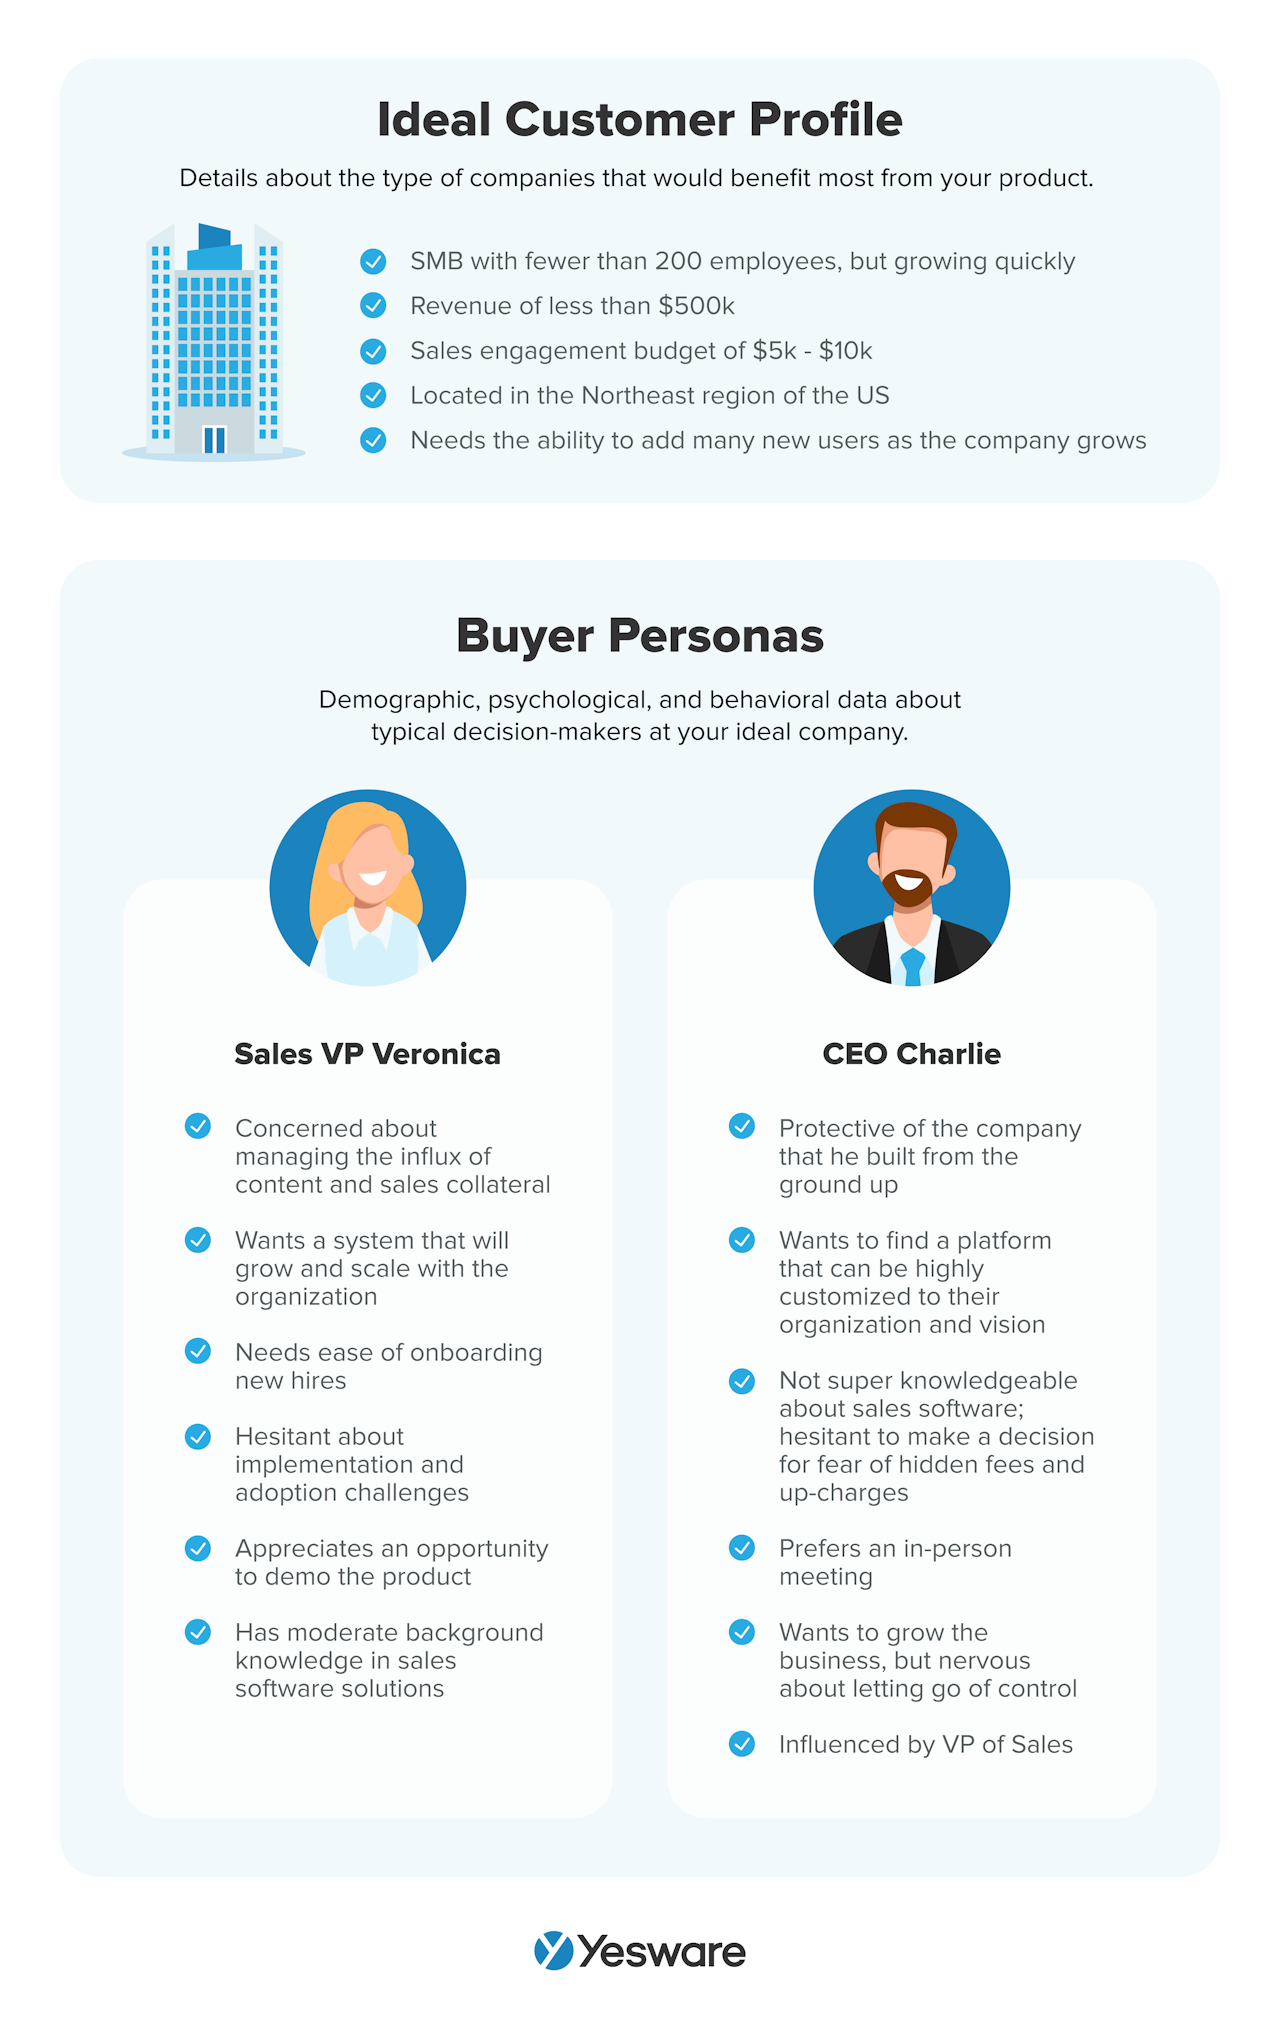 qualifying leads: ideal customer profile and buyer personas